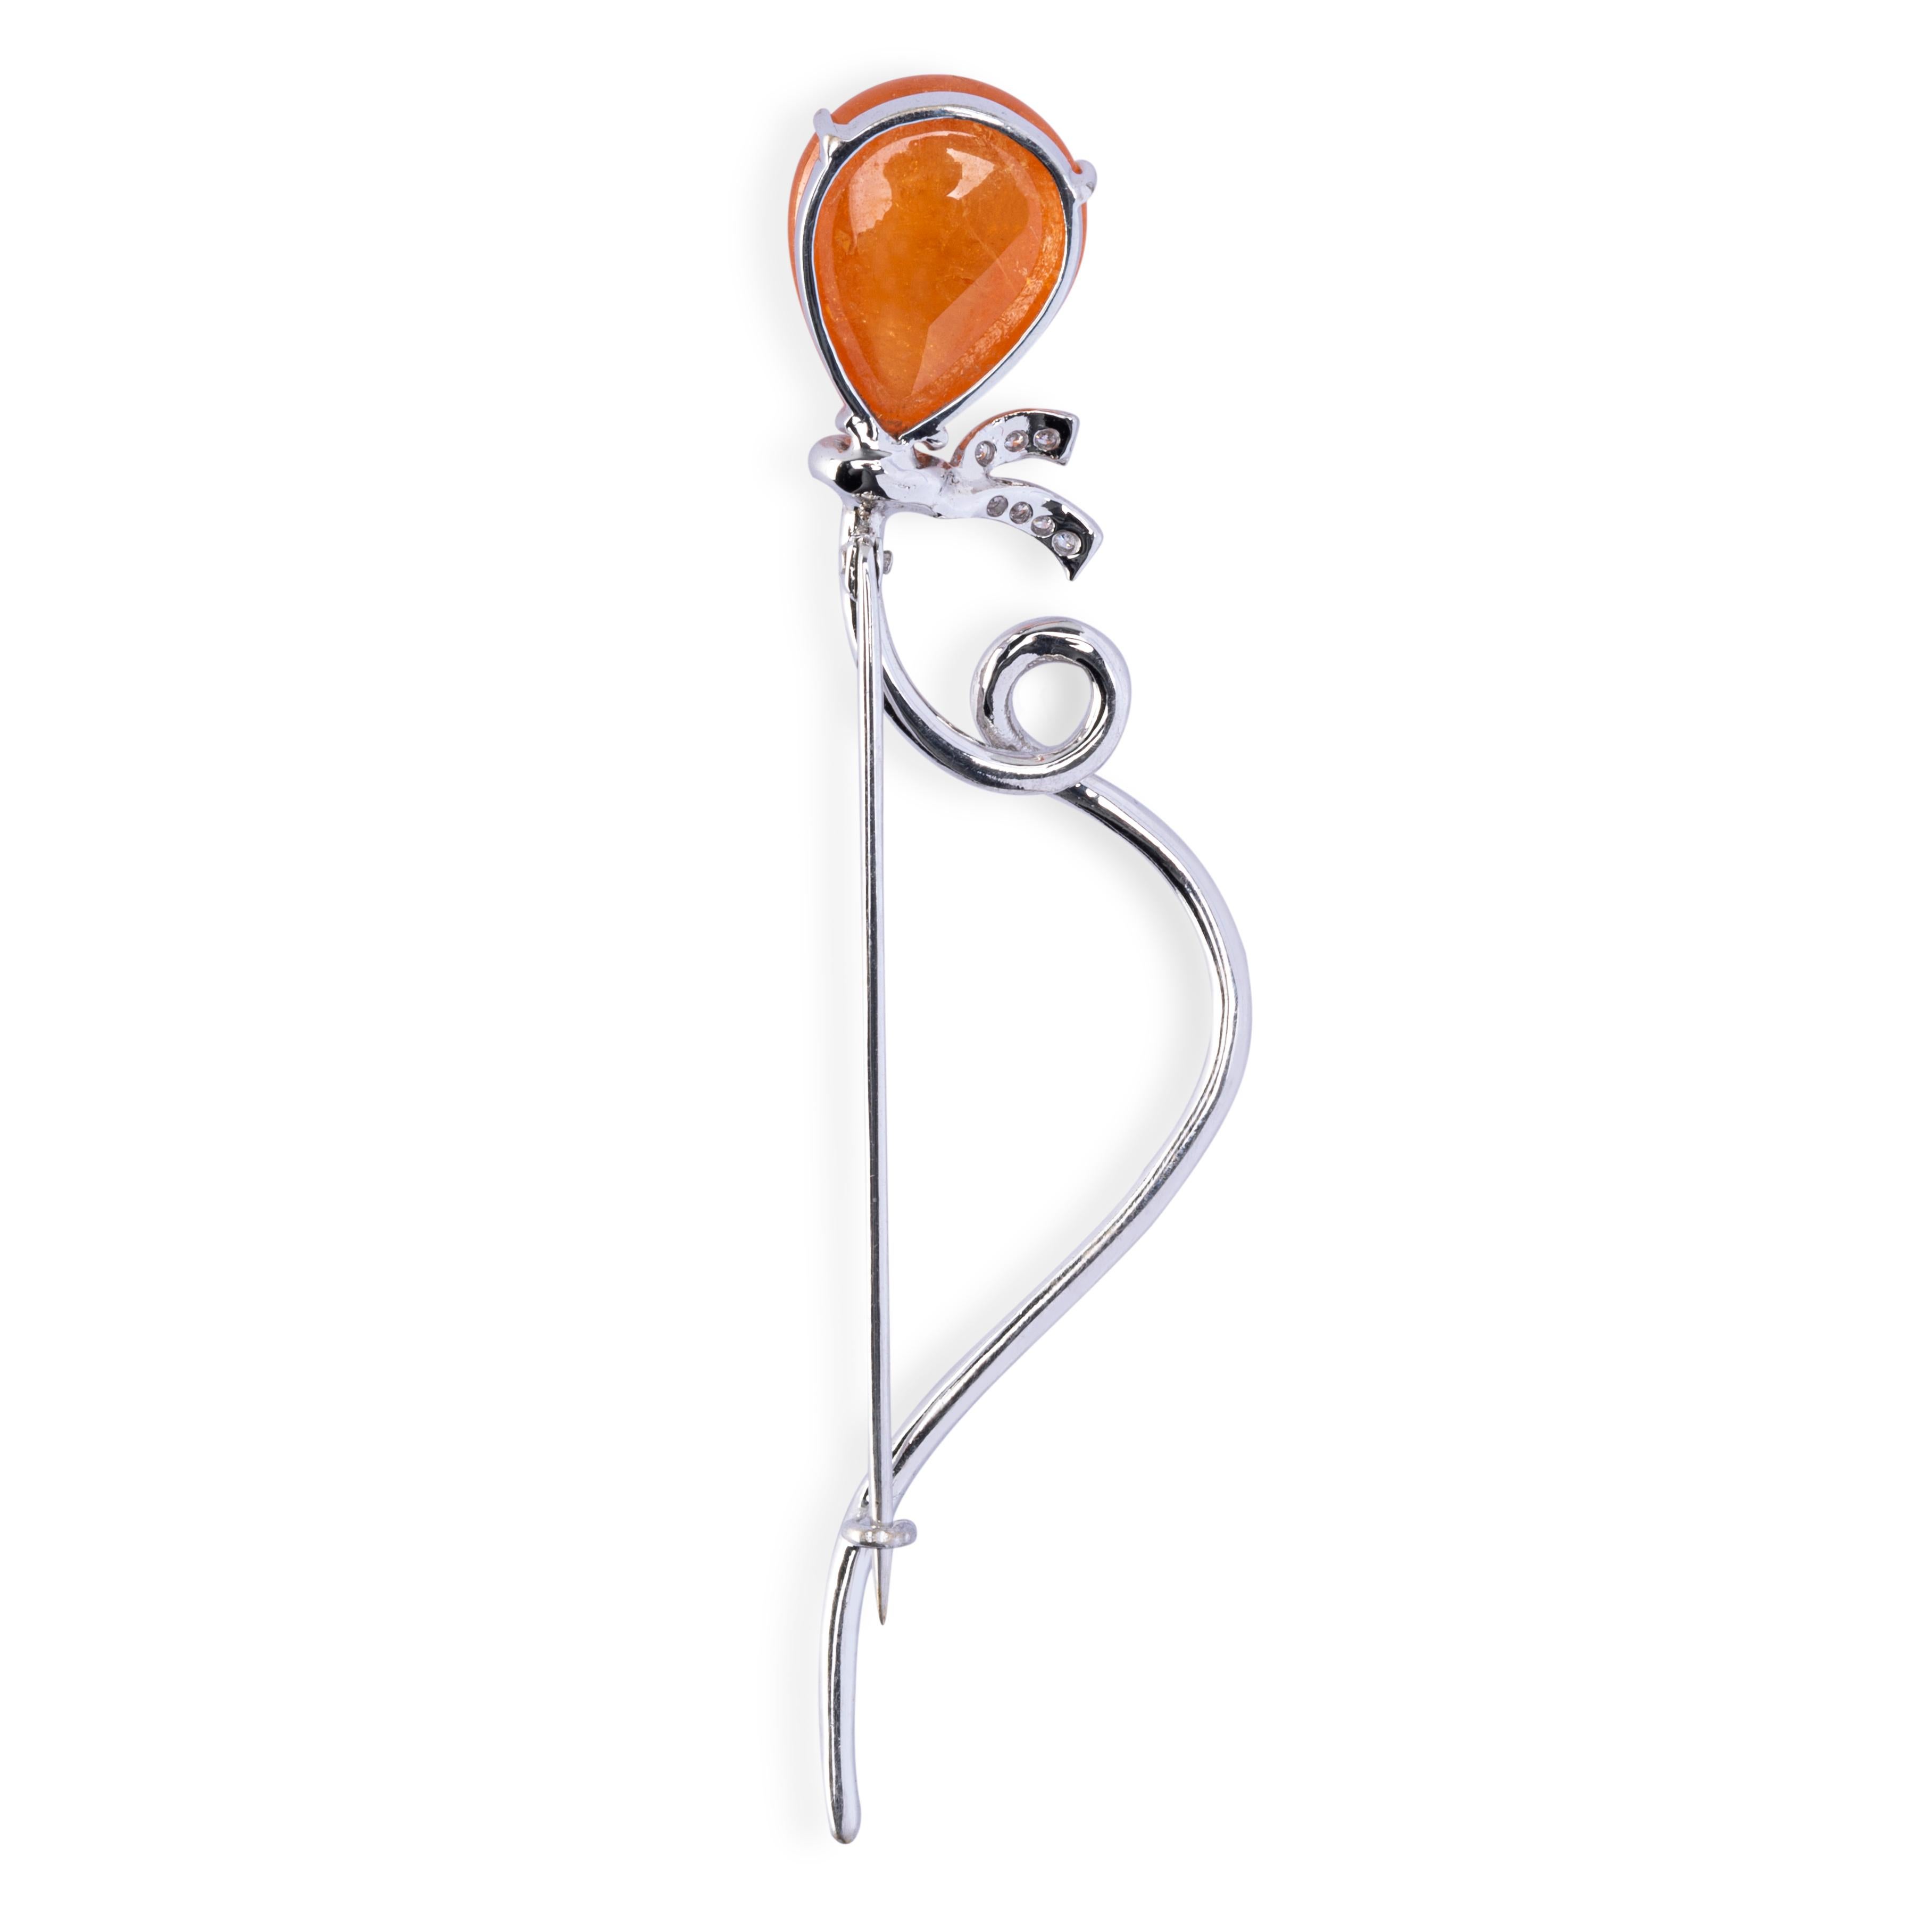 Alex Jona one-of-a-kind collection, 18 karat white gold balloon brooch, featuring a 11.67 carat cabochon spessartite and 0.30 carats of white diamonds.    

Alex Jona jewels stand out, not only for their special design and for the excellent quality